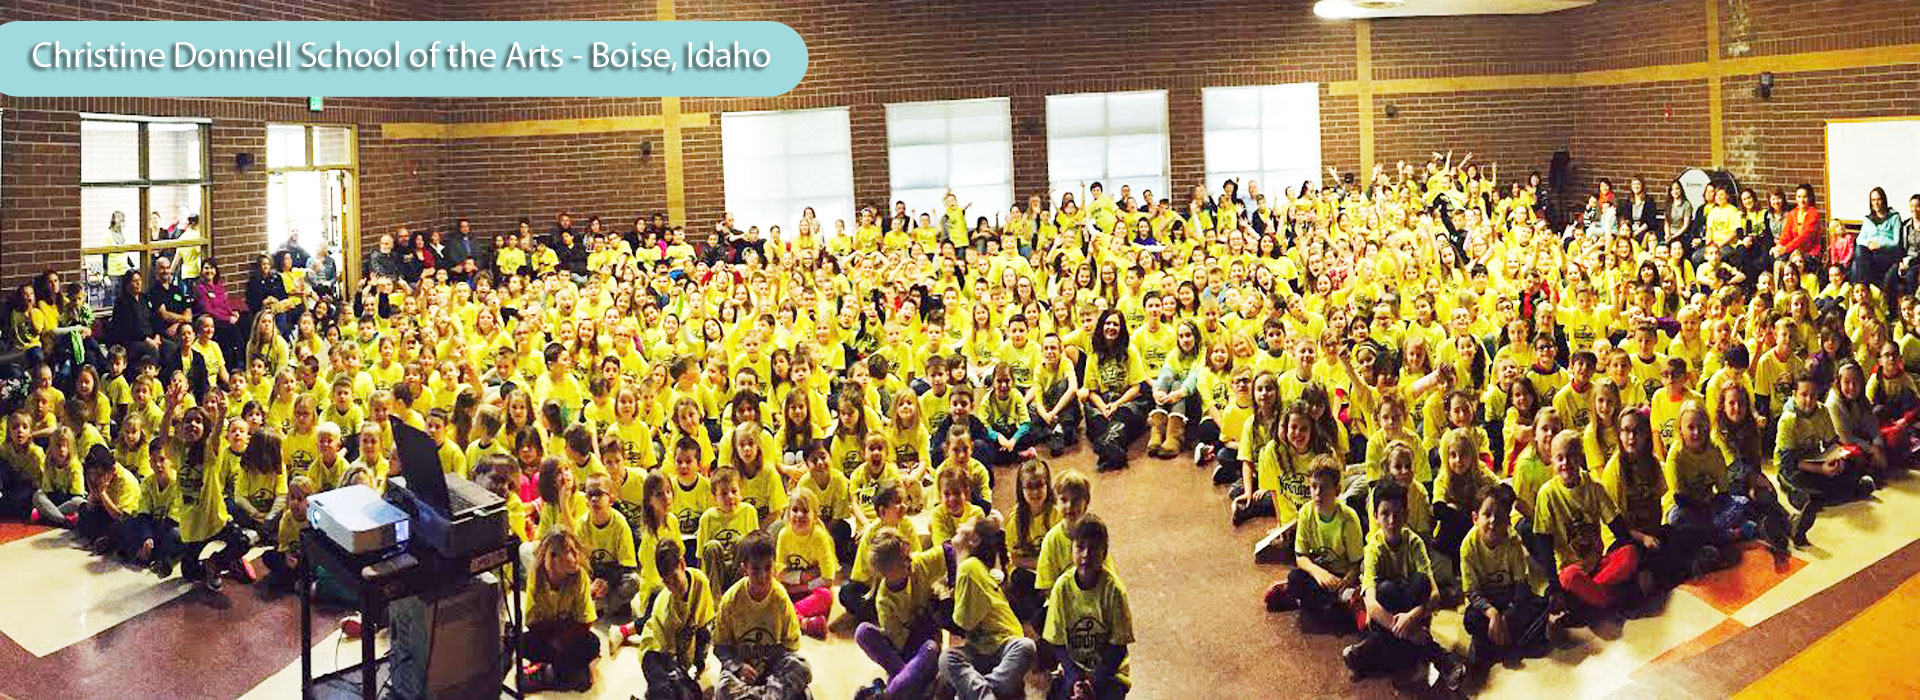 CKM spreads to our Idaho State Legislature & First Boise Elementary School!